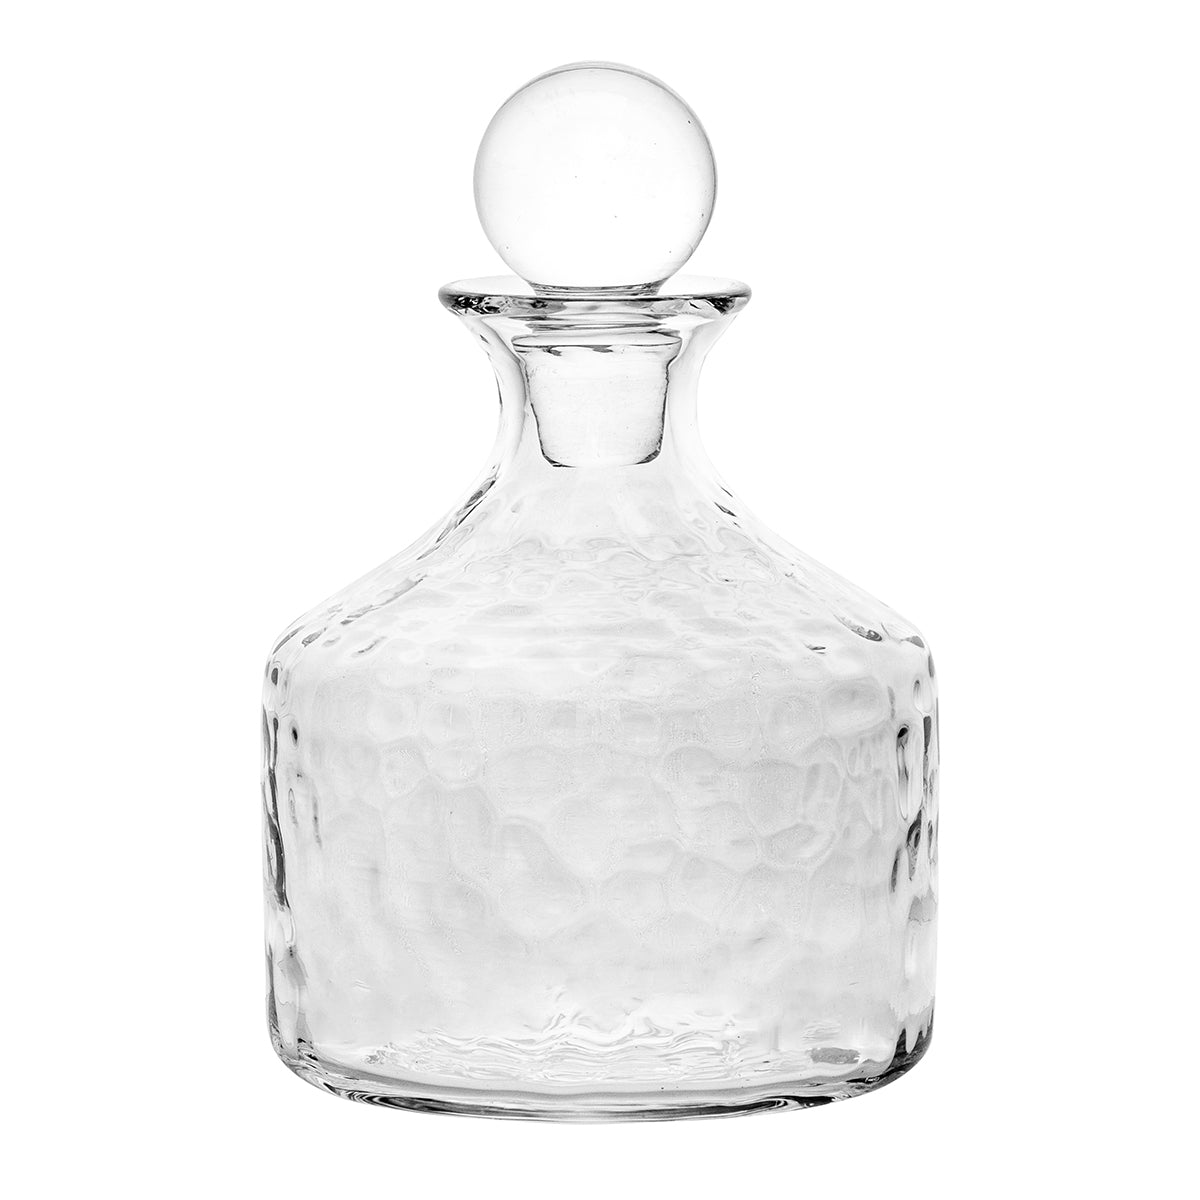 Understated and quite handsome, this textured decanter in mouth-blown glass would look fetching on your home bar or make a lovely gentleman’s gift.